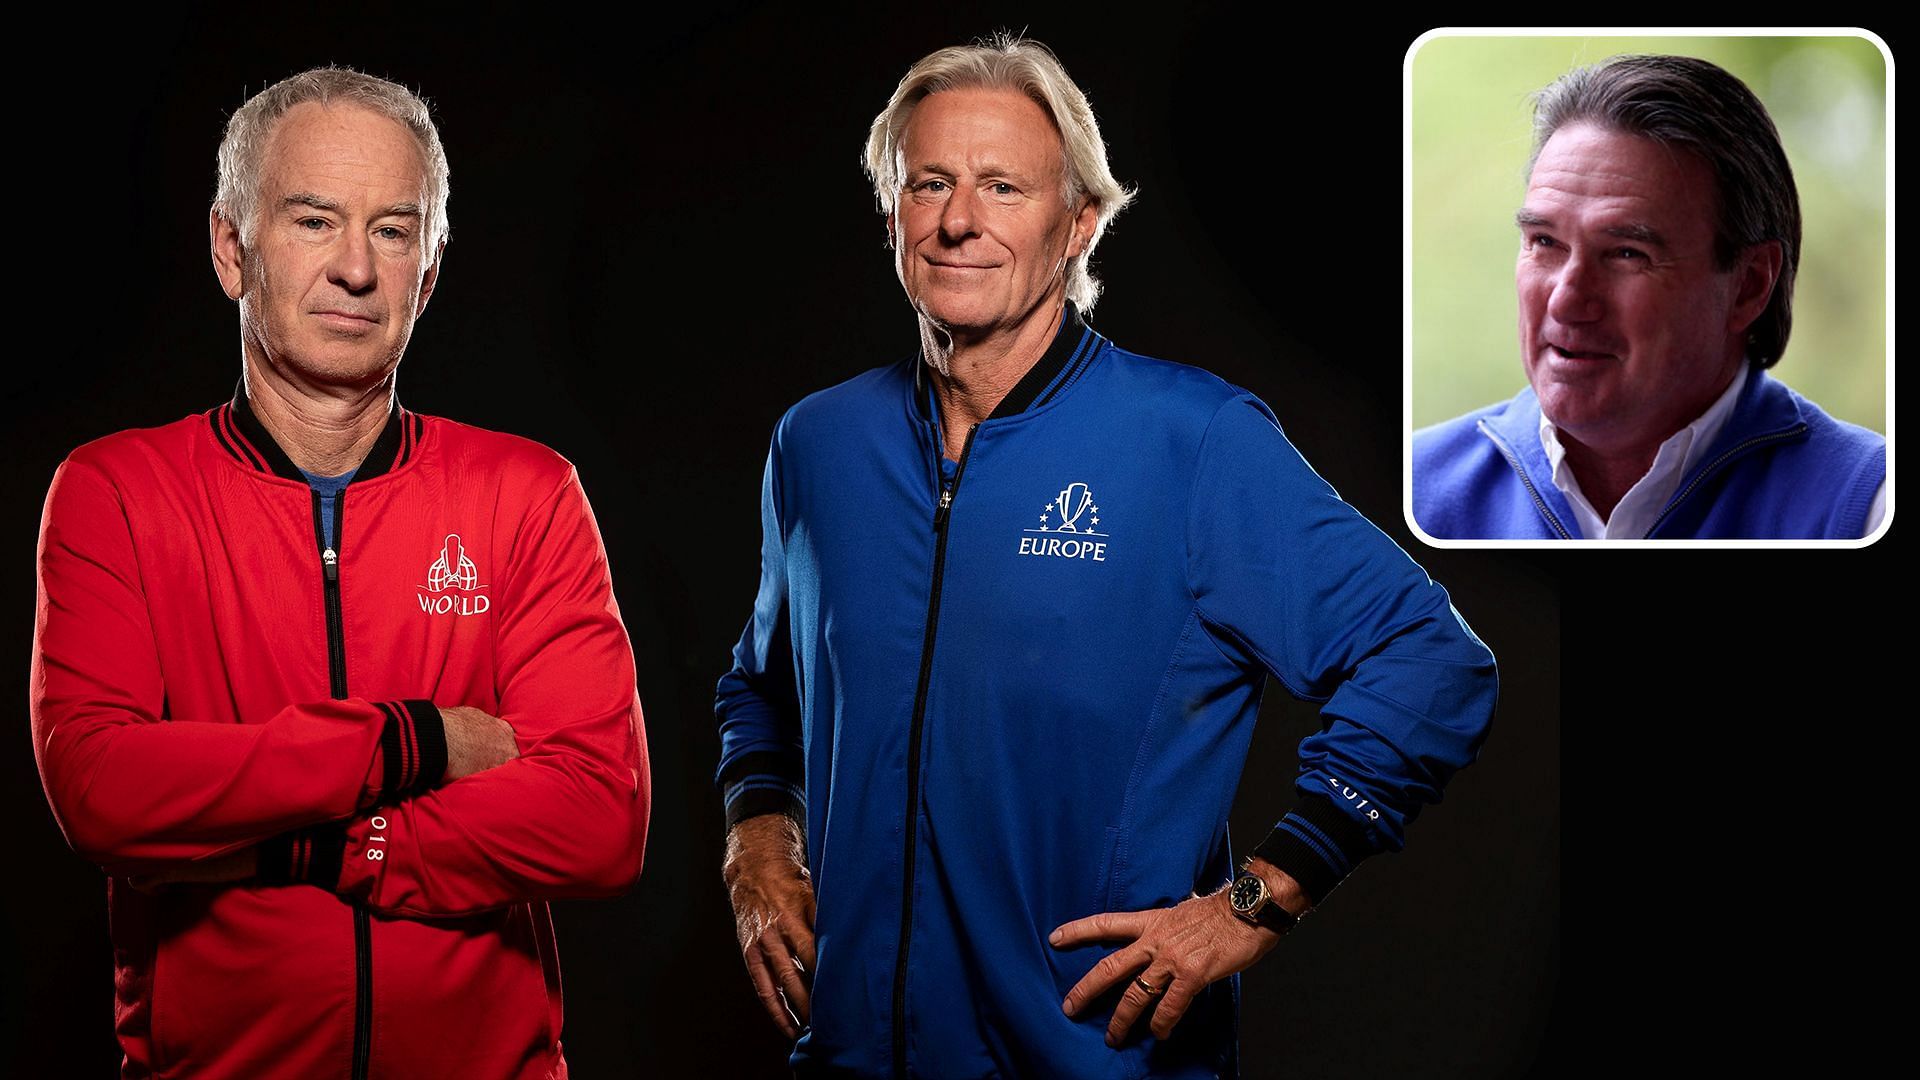 Wimbledon legend Bjorn Borg supports unlikely League One club and